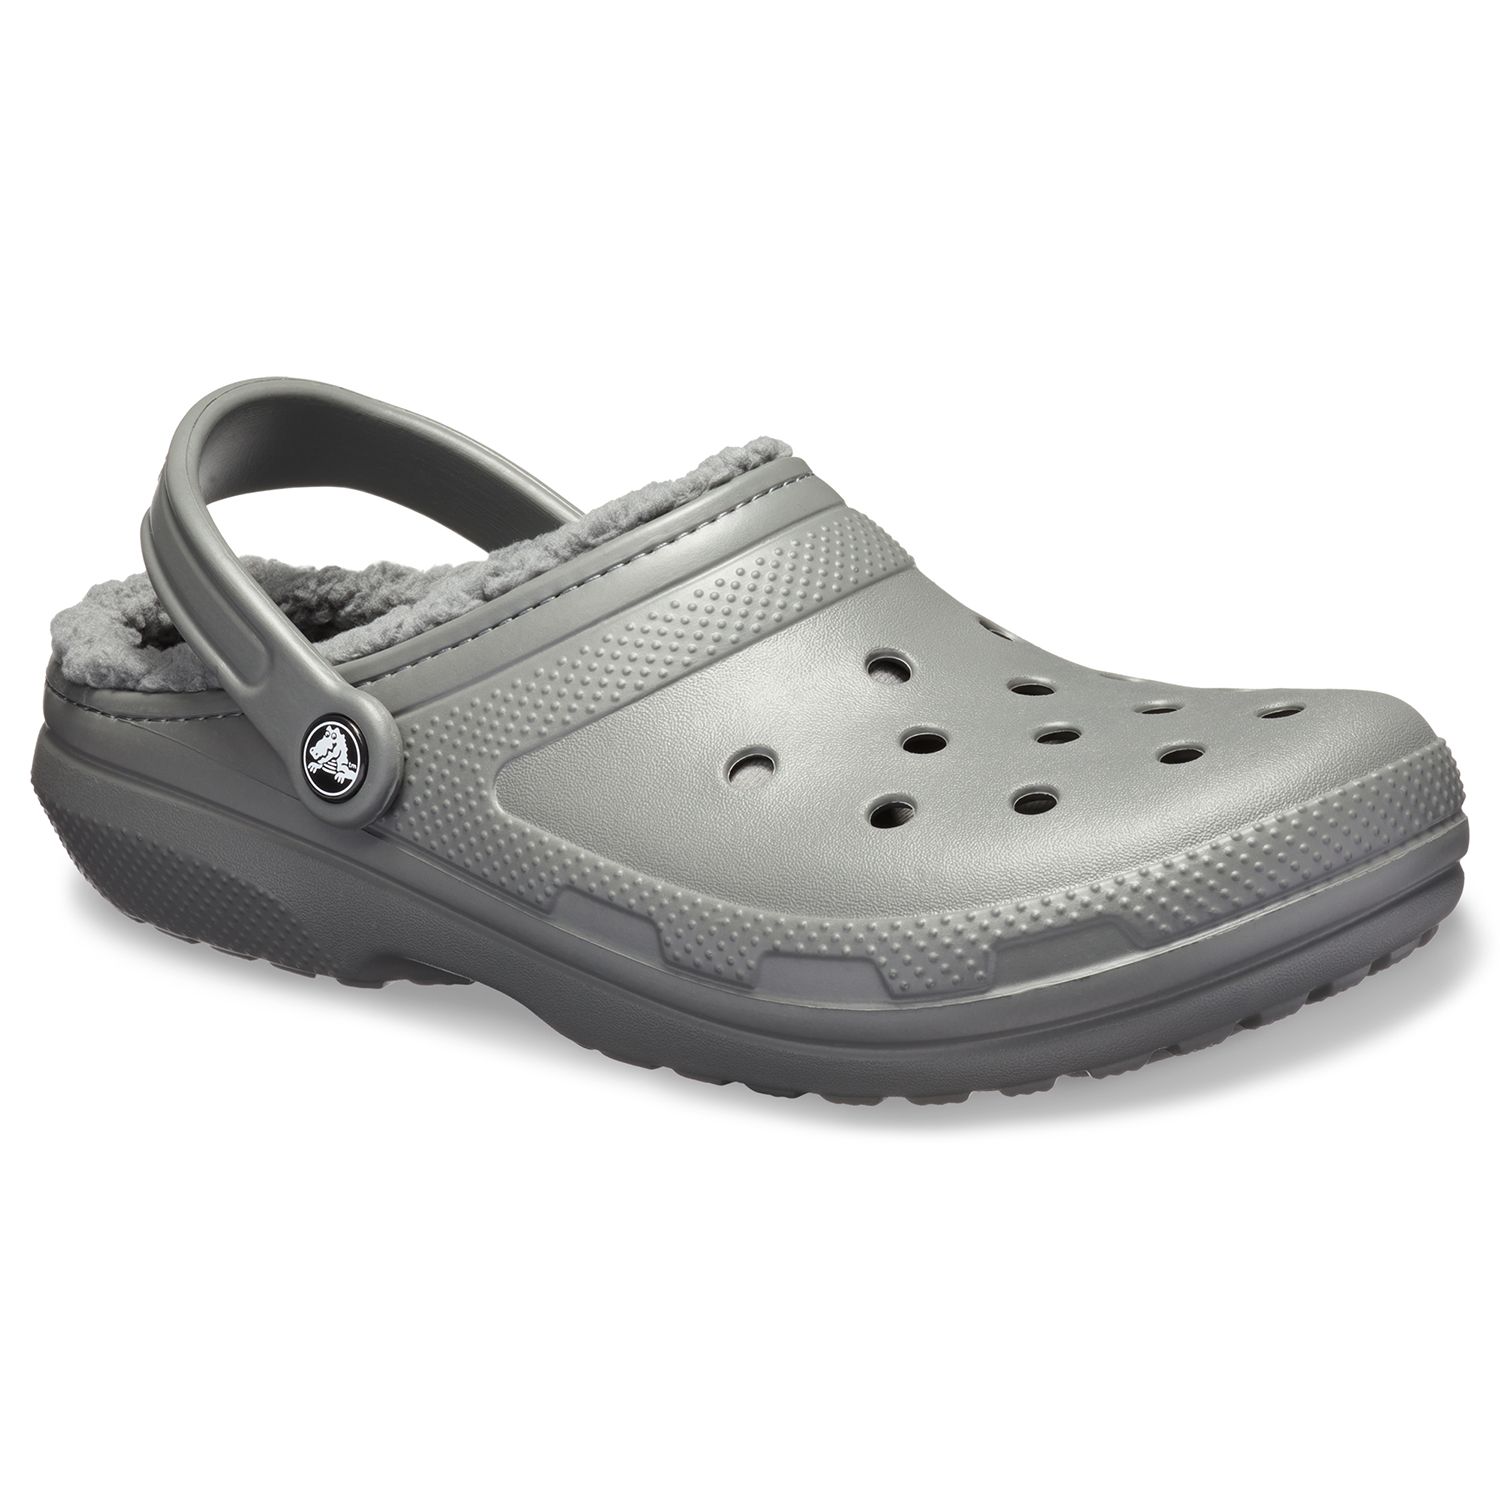 white lined crocs size 8